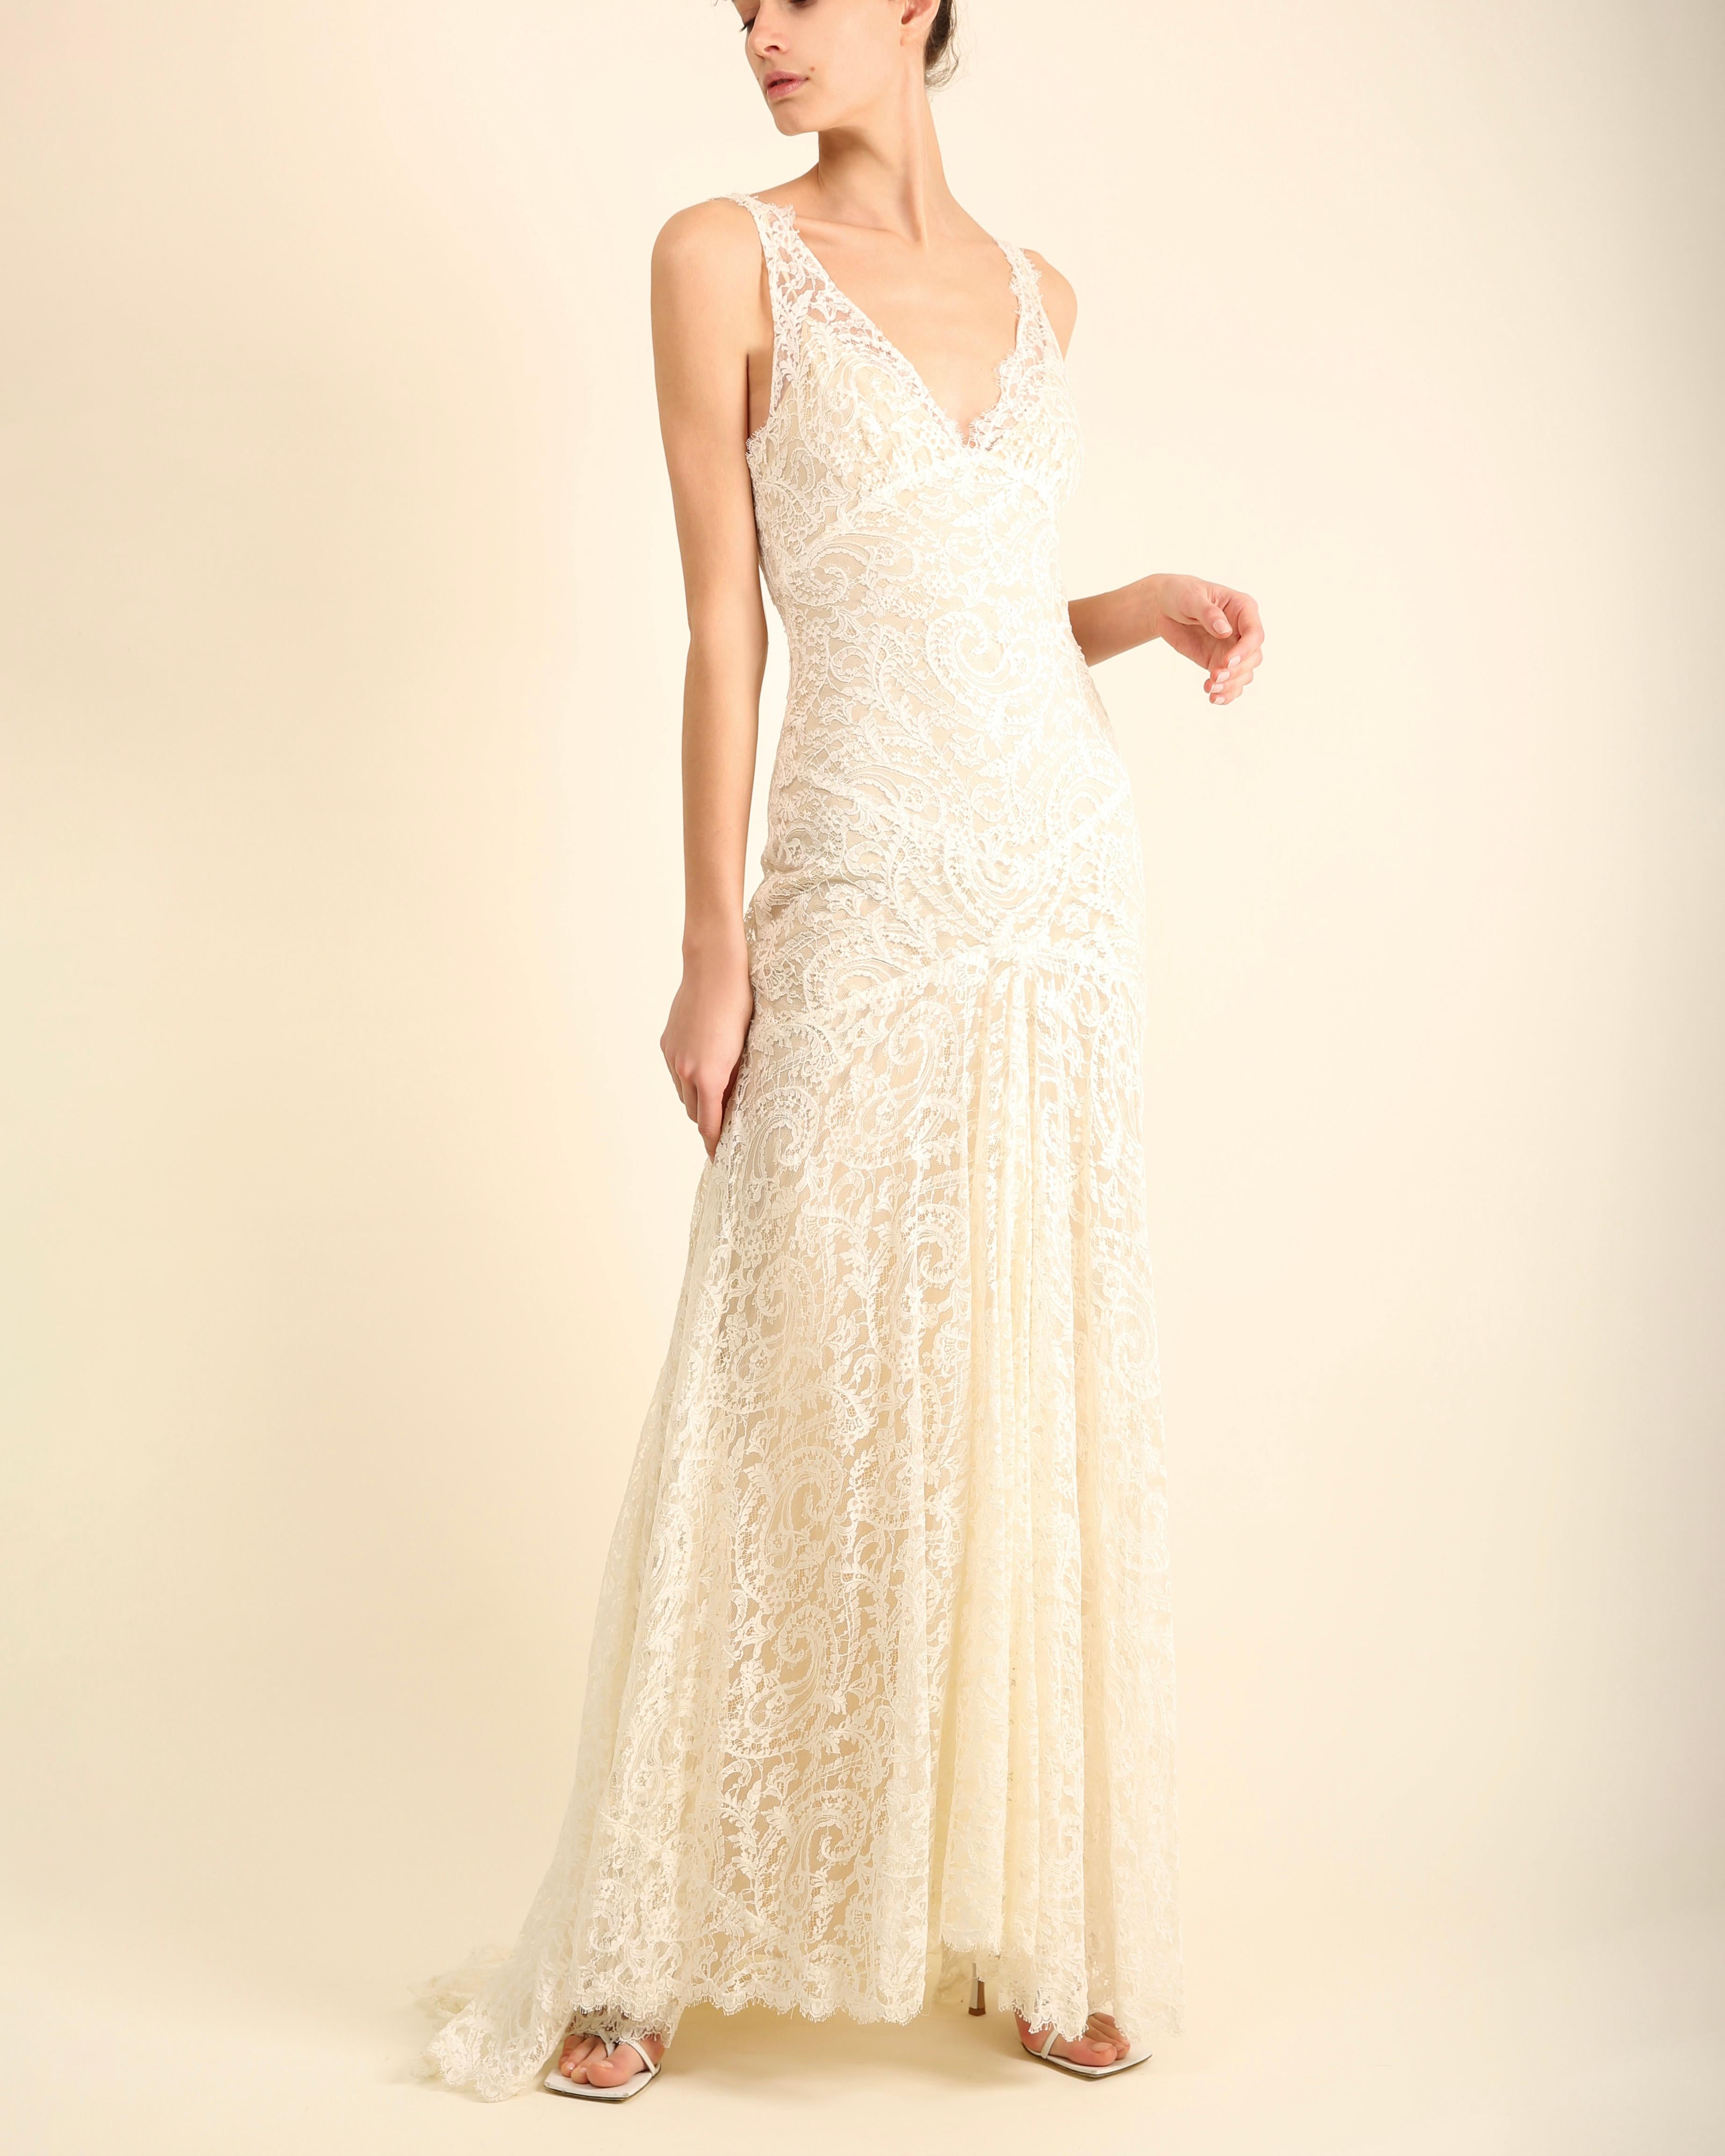 Monique Lhuillier ivory lace plunging backless wedding gown with train dress  7